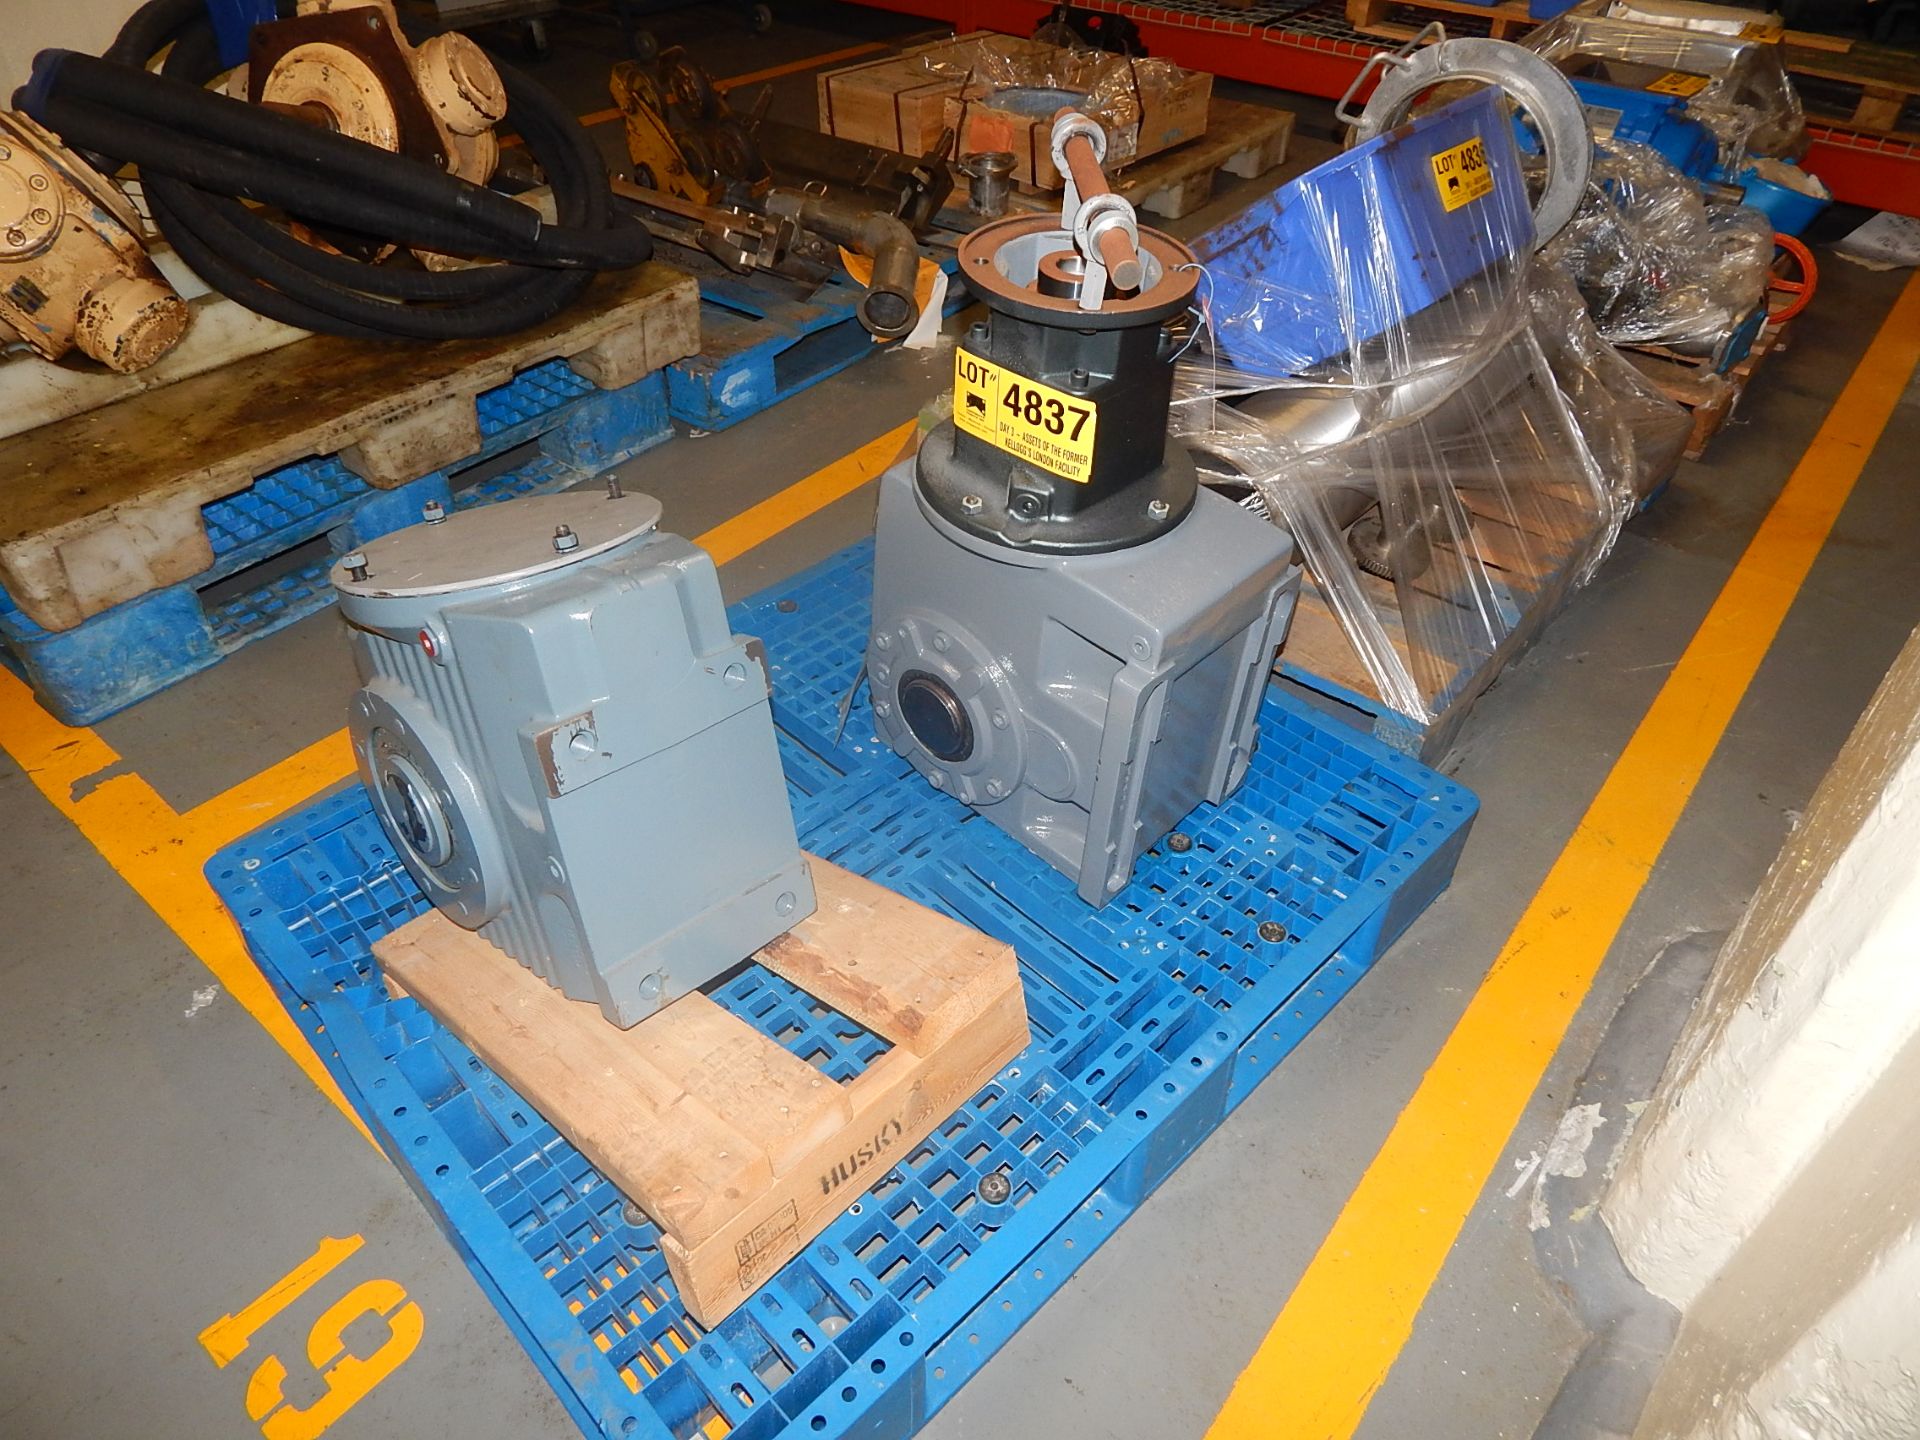 LOT/ CONTENTS OF SKID CONSISTING OF (2) GEAR BOXES (BUILDING 1A, GROUND)